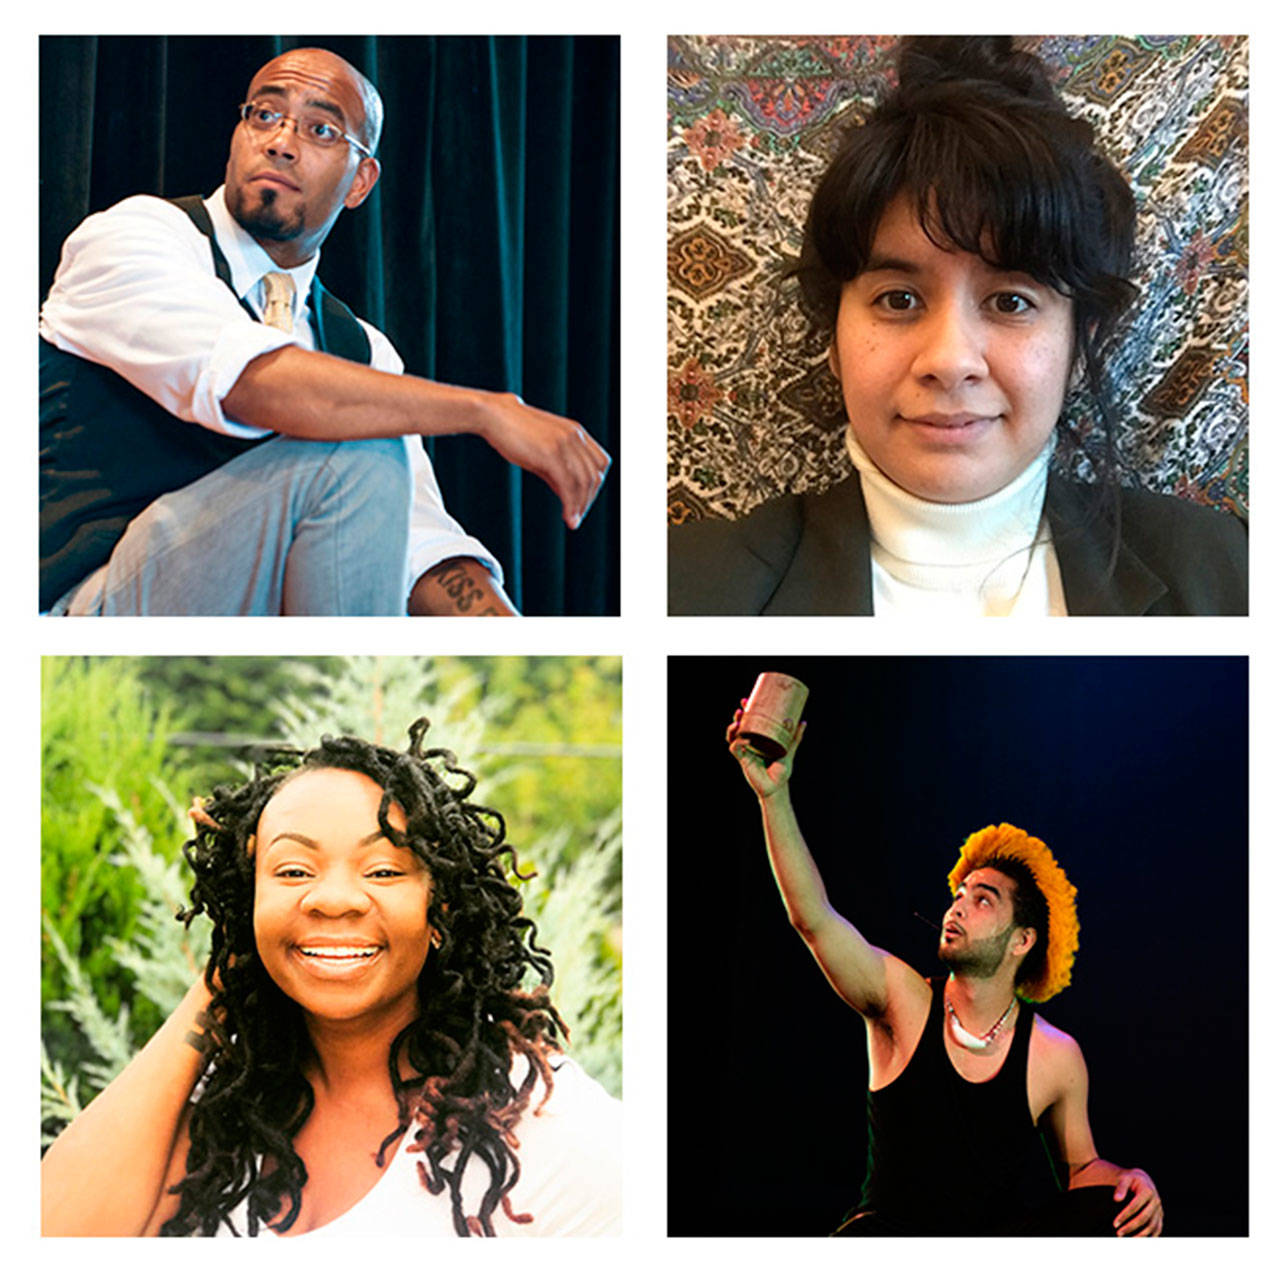 Daemond Arrindell and Joana Chacon (top left and right) and Dr. Bre Haizlip and Dakota Camacho (bottom left and right) and Stephanie Anne Johnson (not pictured) are speakers and performers at a virtual event marking MLK Day at Vashon Center for the Arts, to take place at 3 p.m. Monday, Jan. 18, at vashoncenterforthearts.org. In keeping with the tradition of sharing food at the event, treat boxes will be distributed from 12 to 2 p.m. Monday, Jan. 18, in the VCA parking lot (Courtesy Photos).